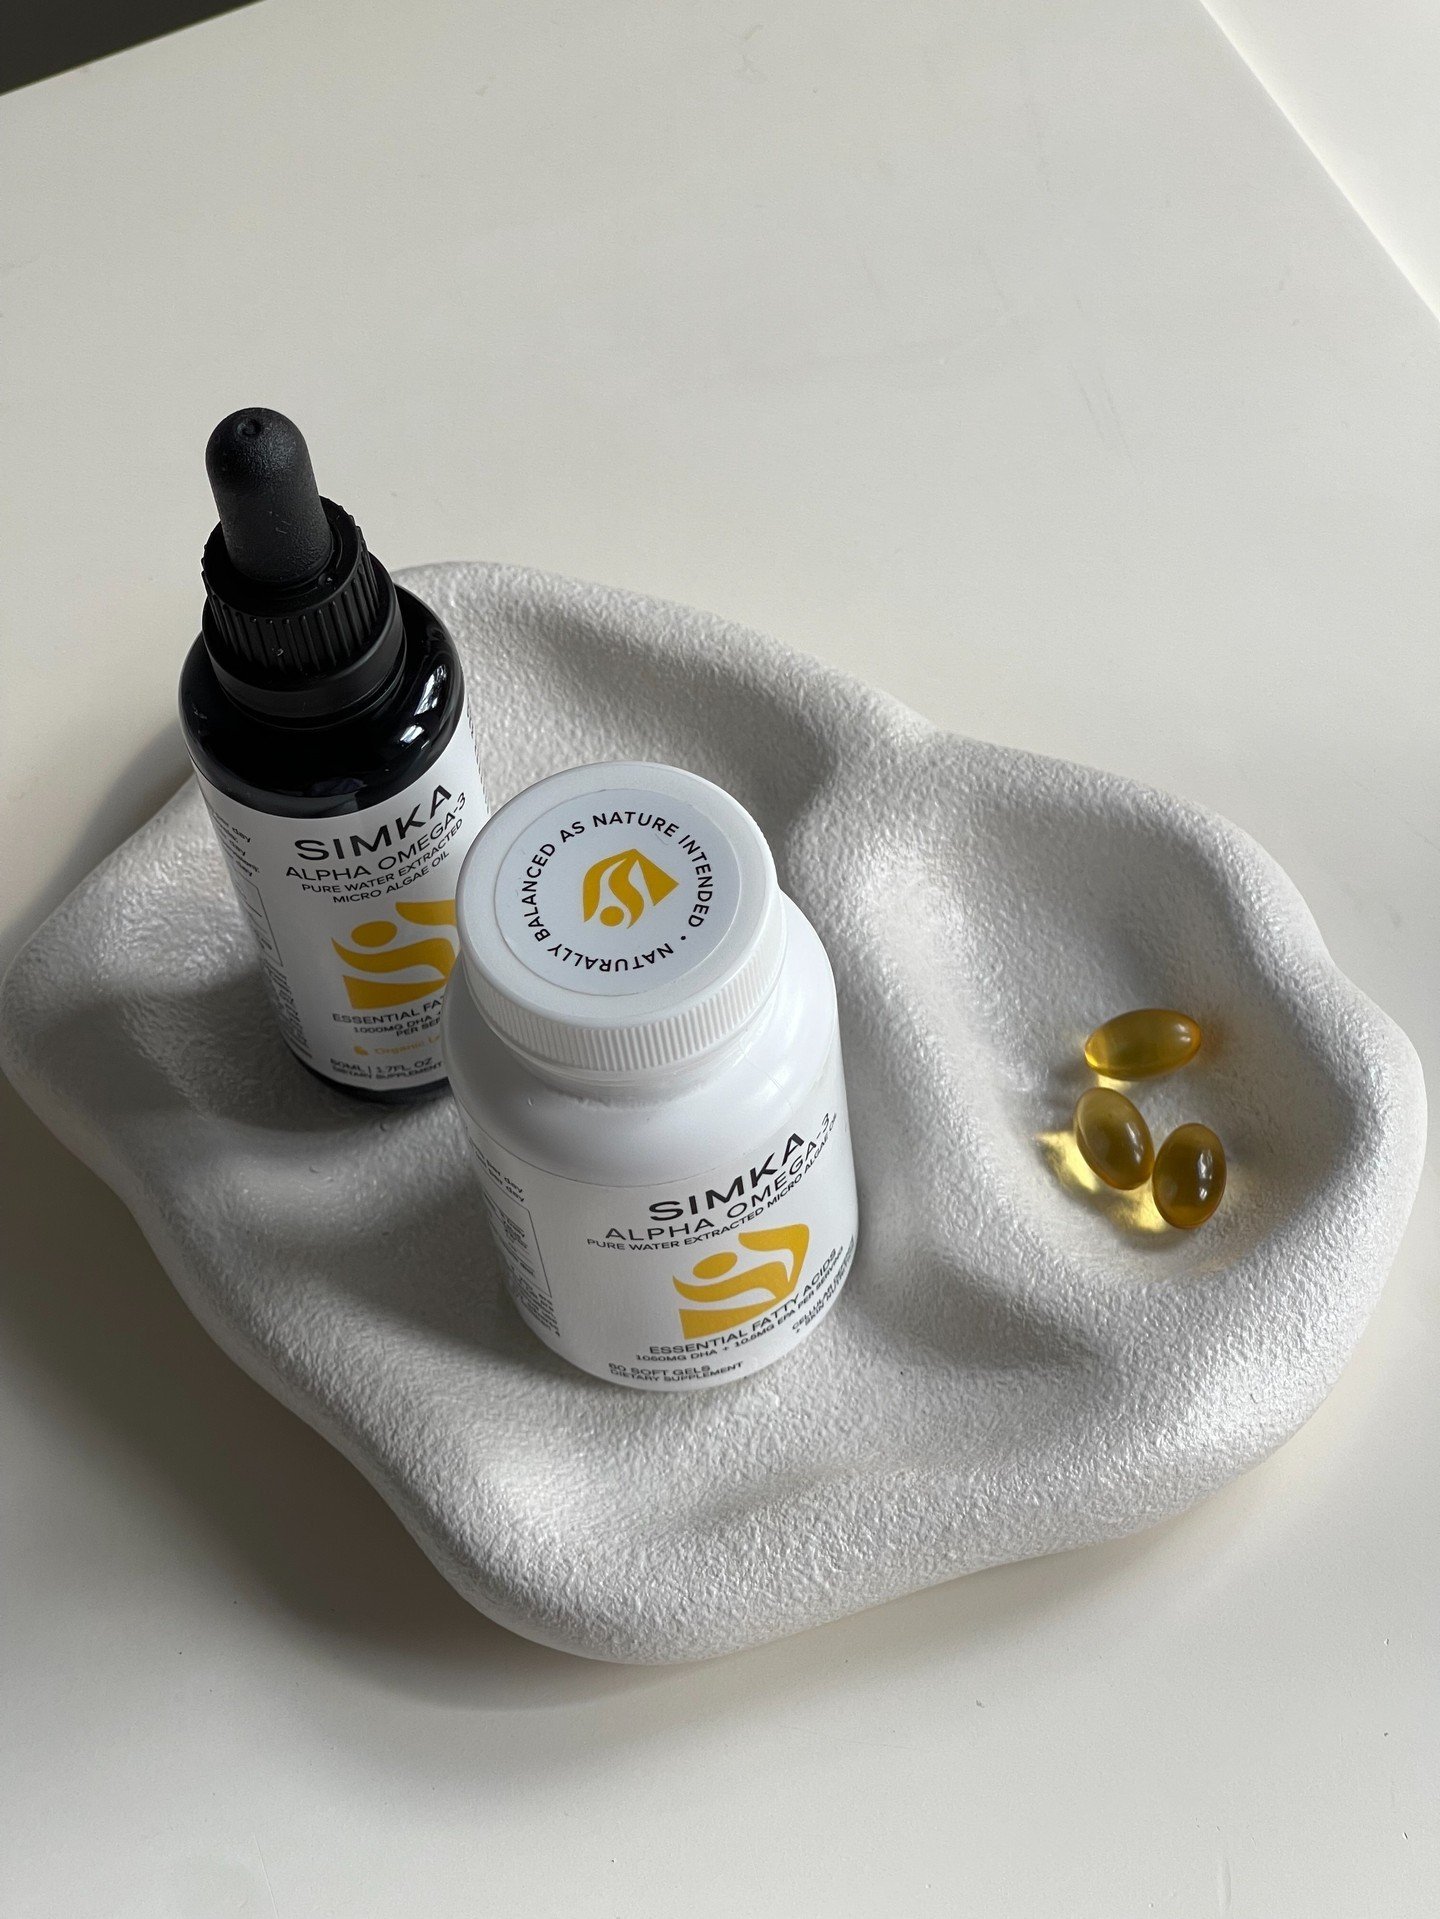 SIMKA Alpha Omega-3 is more than an Omega-3 supplement; it's about empowering your skin's defence mechanisms, combating EFA deficiency for a radiant and healthy complexion.

To find your nearest SIMKA stockist, visit the link in our bio.

#simkaskin 